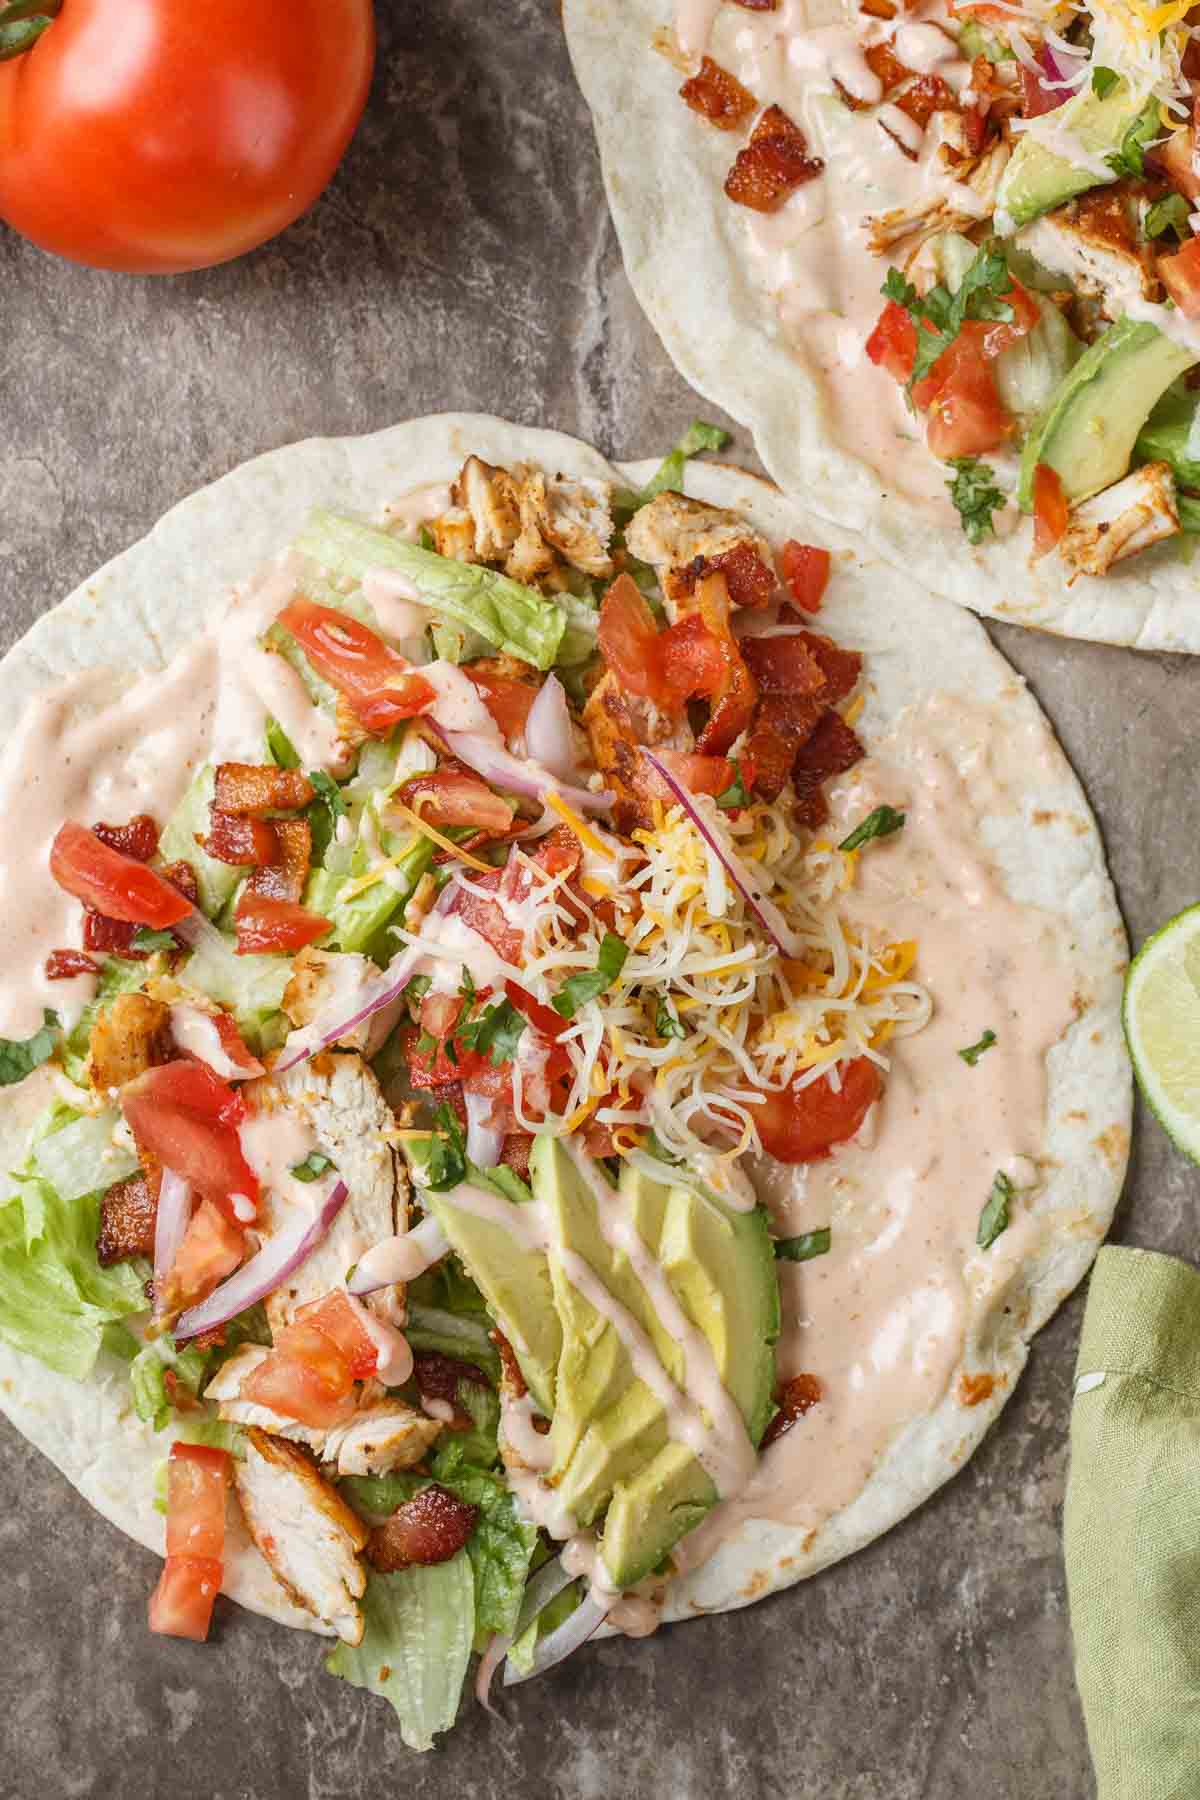 Chicken wrap with chicken, cheese, lettuce and bacon and Ranch on a flour tortilla.